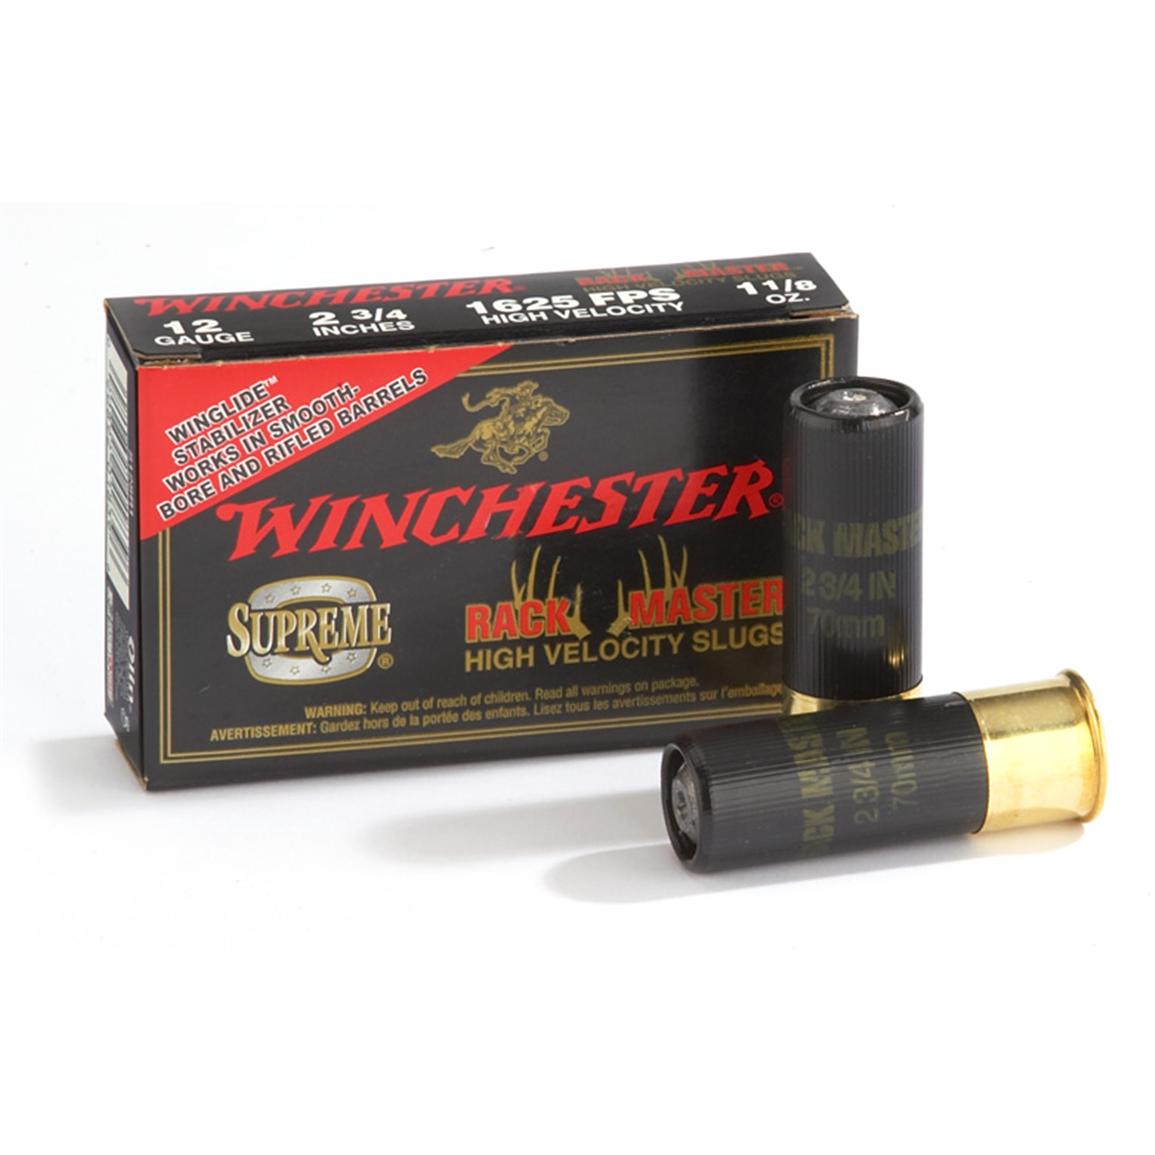 5 Rounds Winchester Supreme Rackmaster 12 Gauge 2 3/4 1.